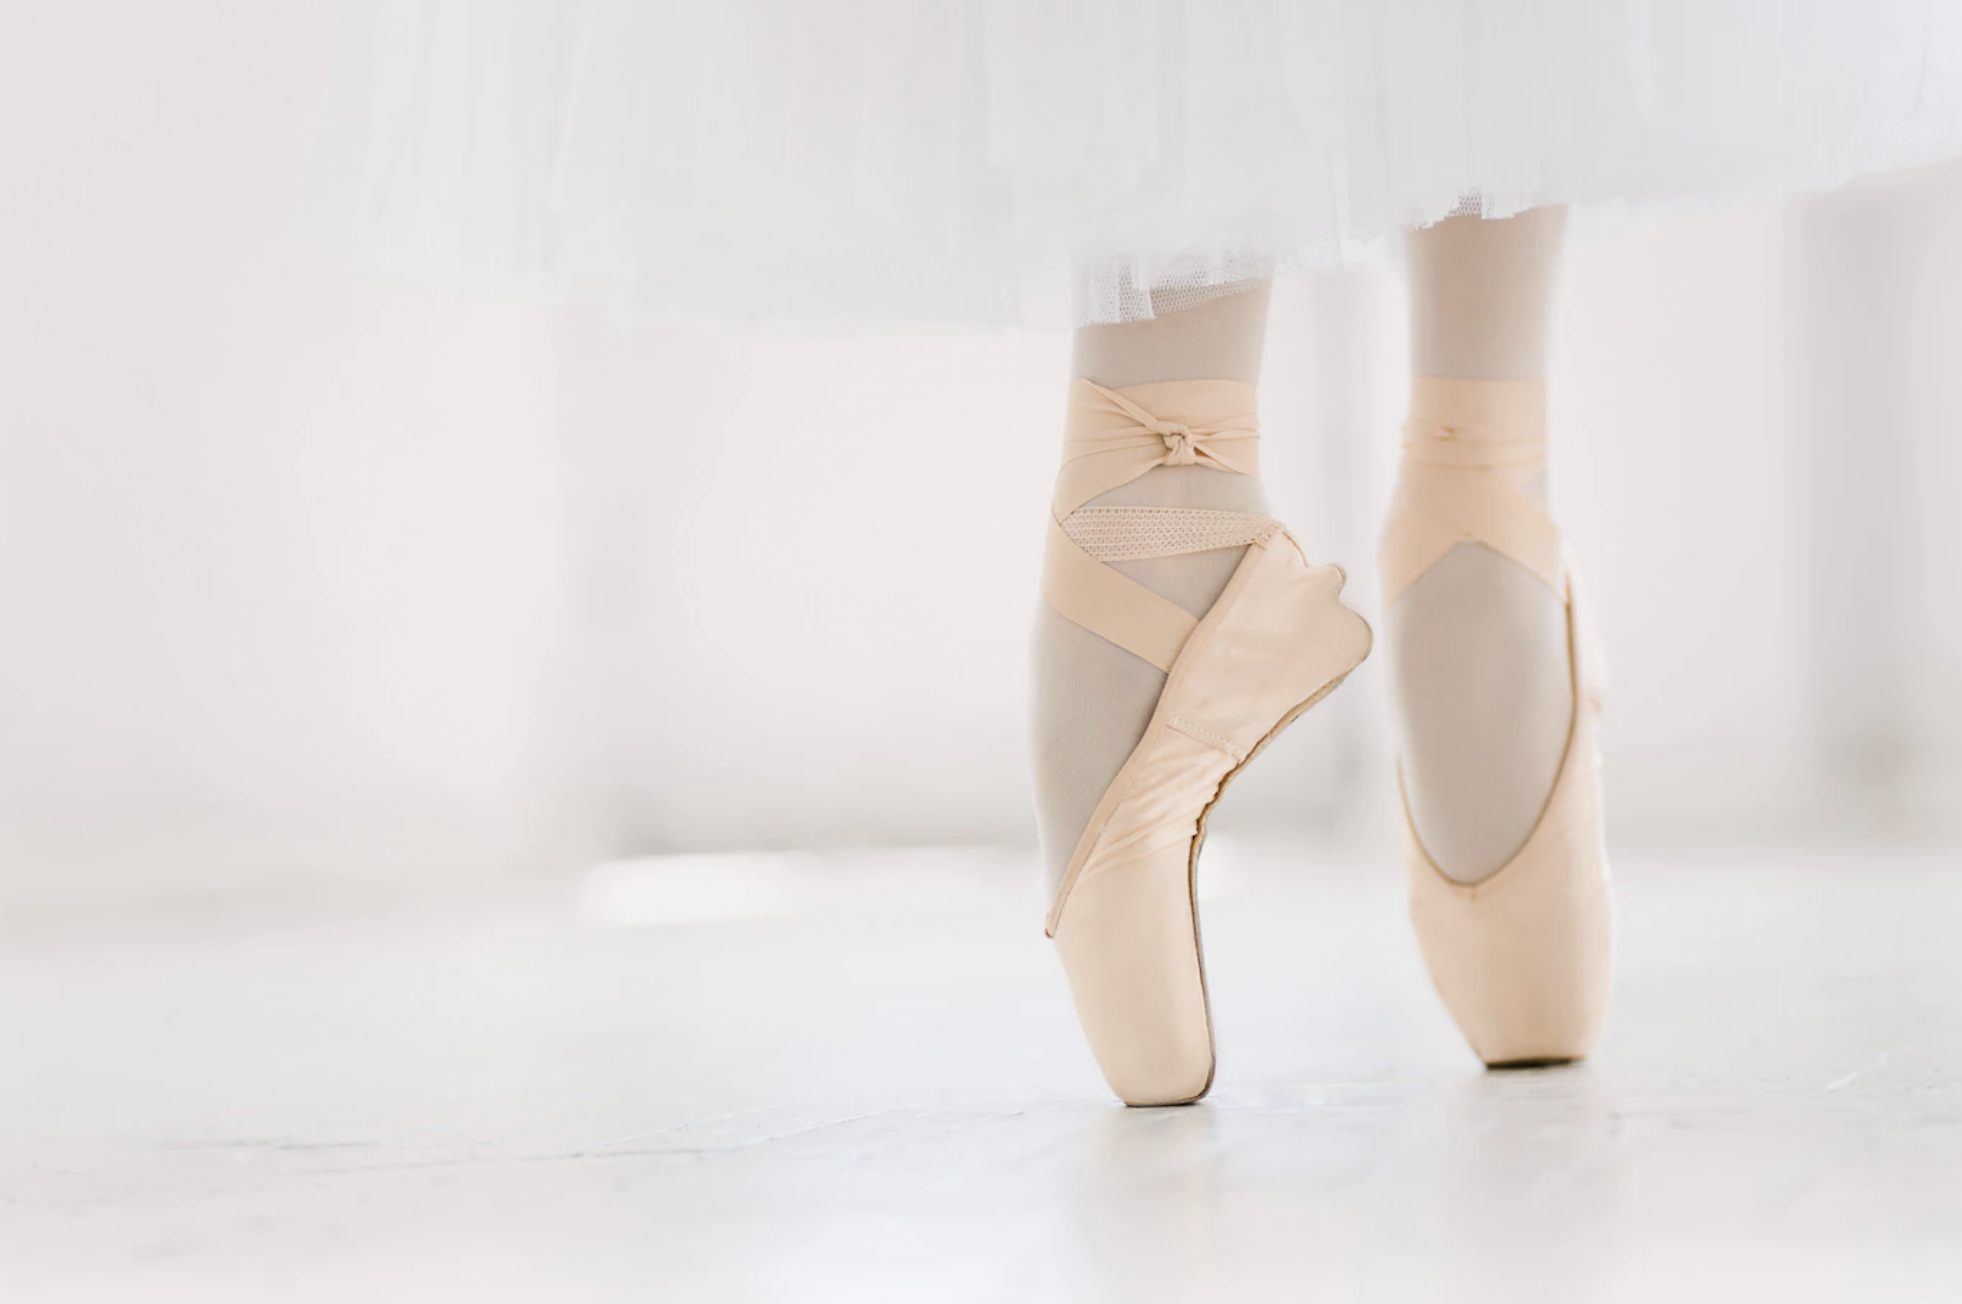 Someone standing with ballet shoes en point